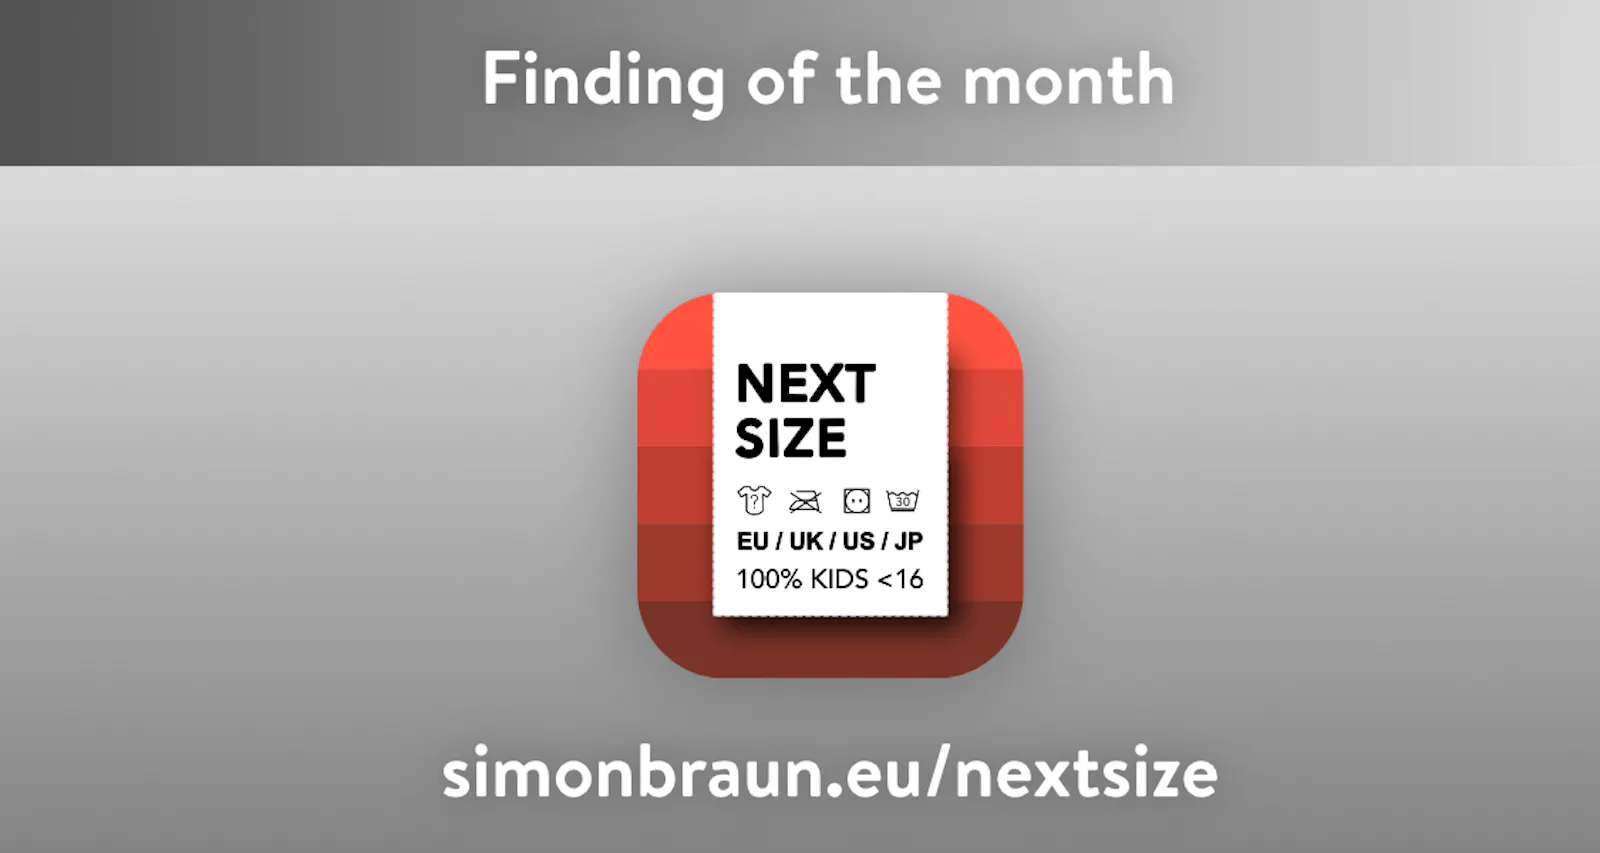 Finding of the month: Next Size. Showing an app icon: washing label on red background.